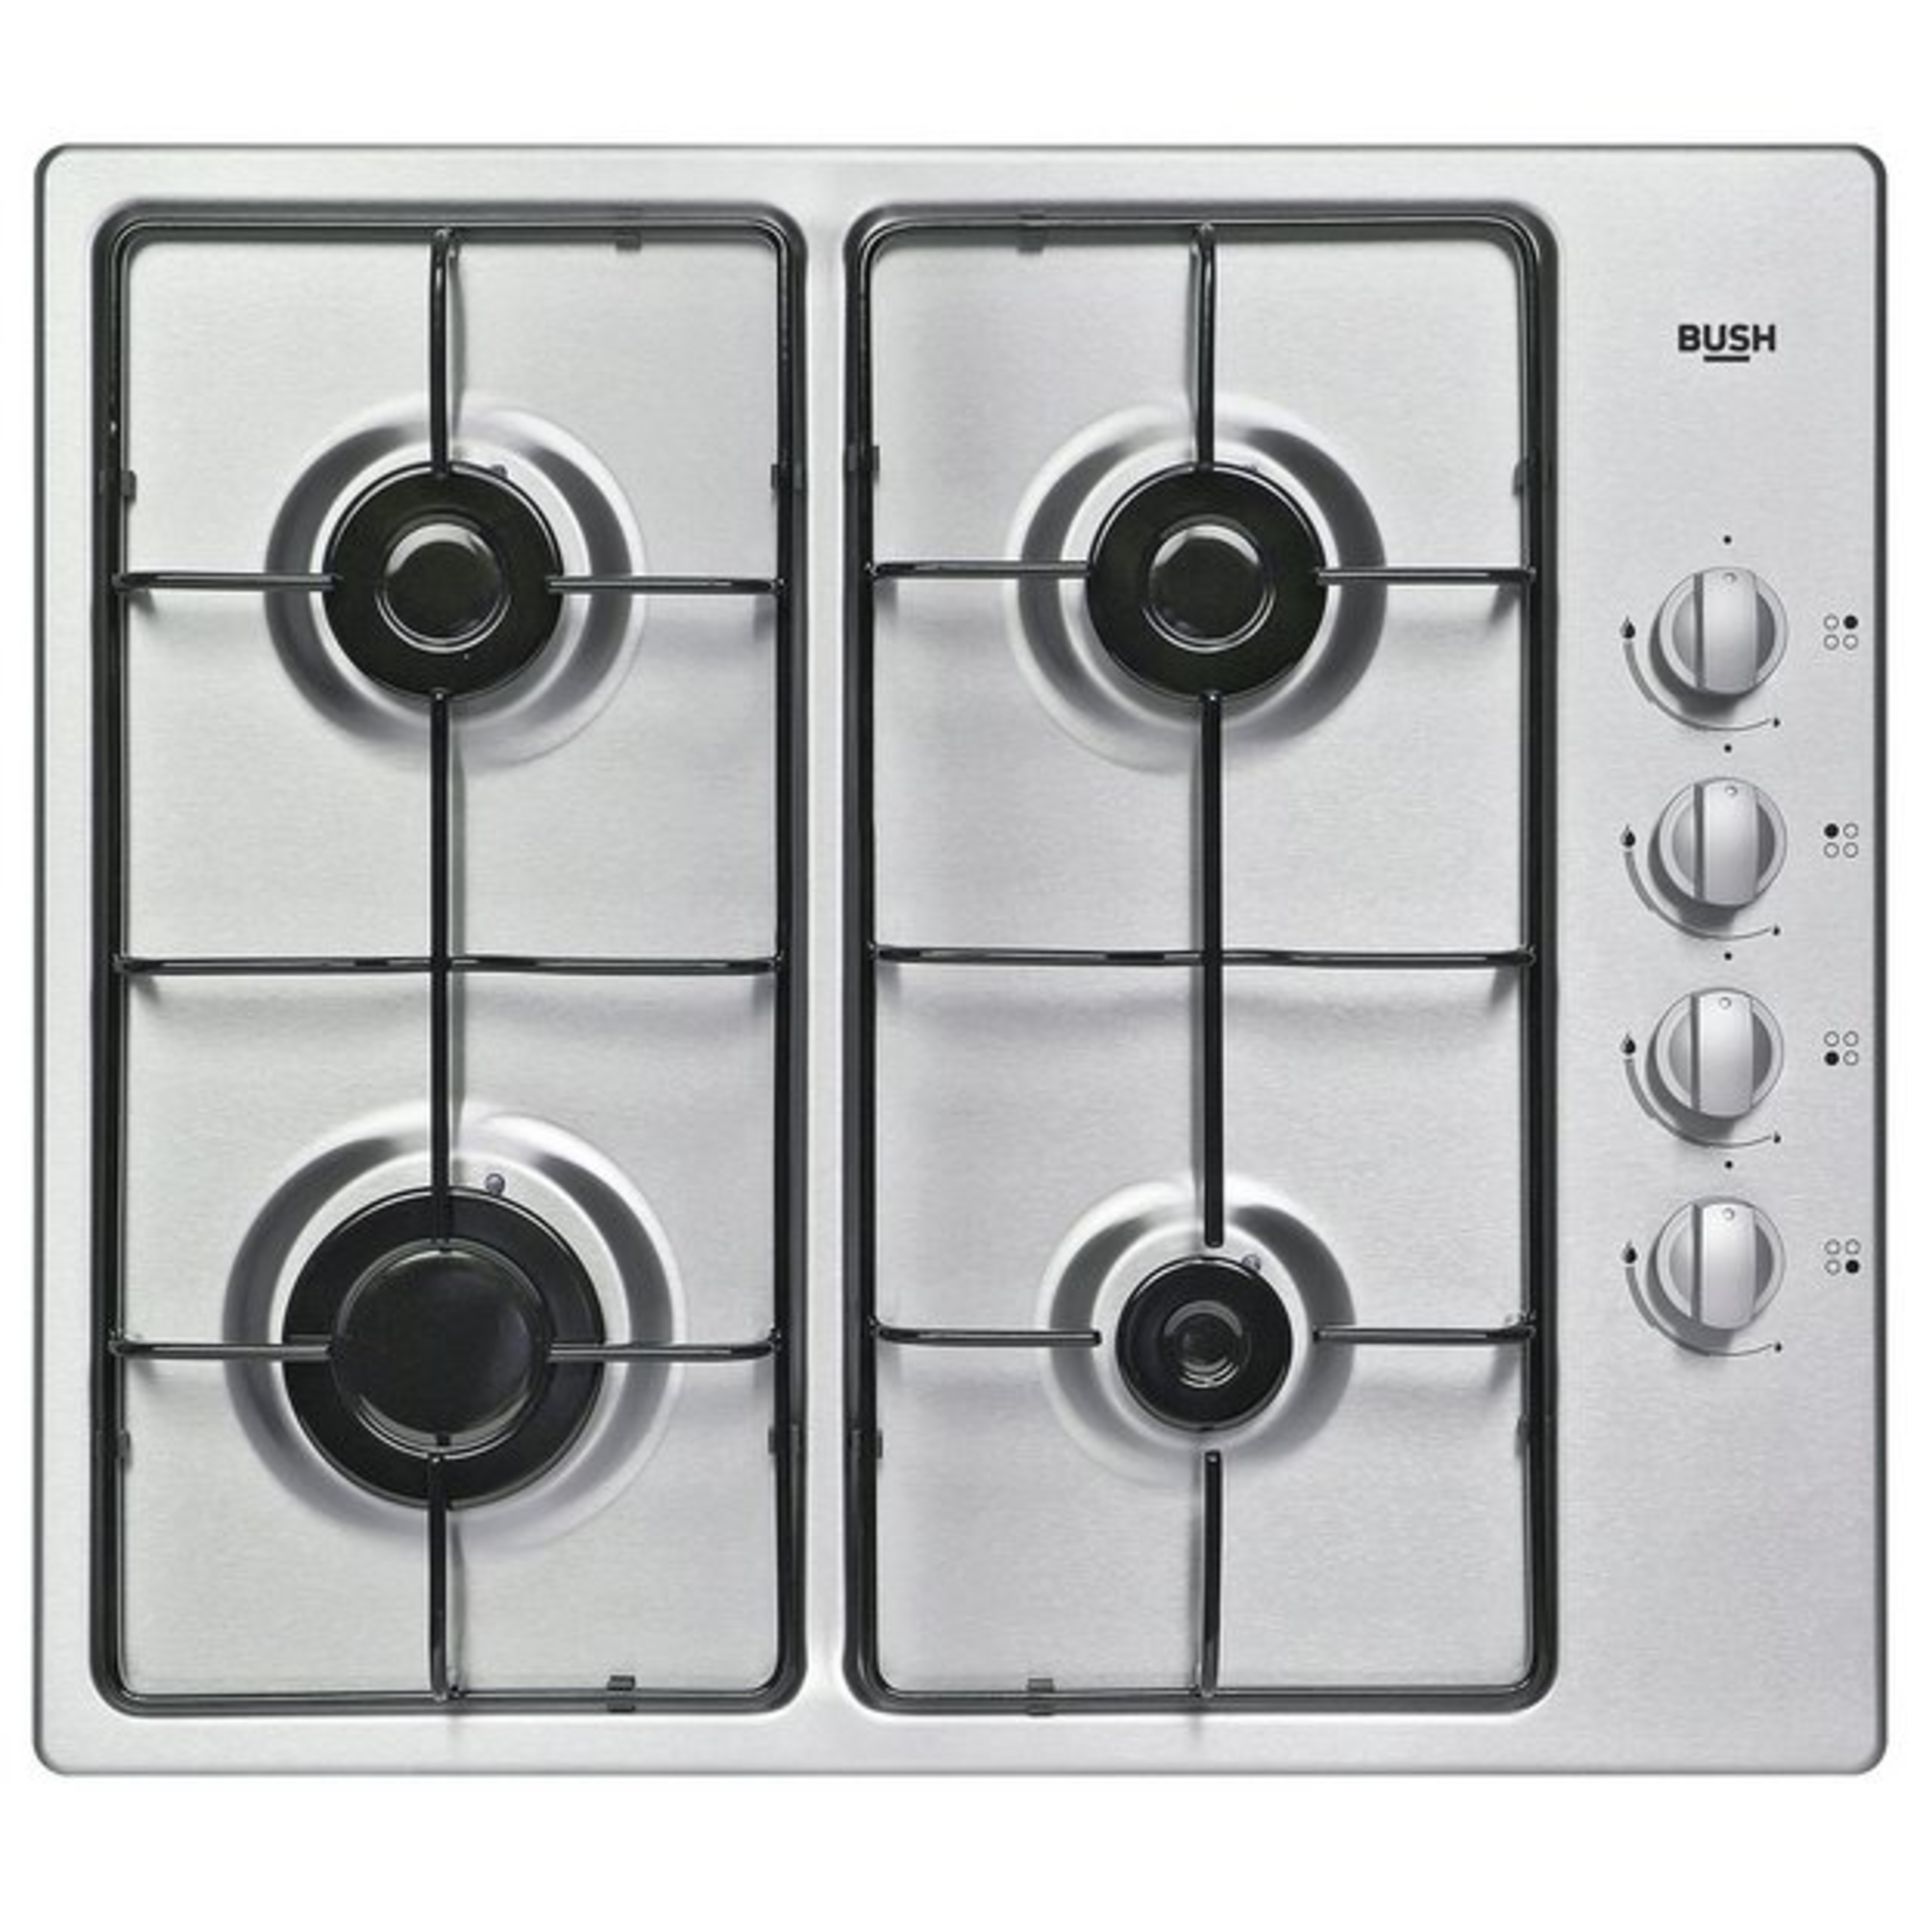 + VAT Grade A/B Bush DH60GNSS Gas Hob - Four Cooking Zones - Automatic Ignition - Side Mounted